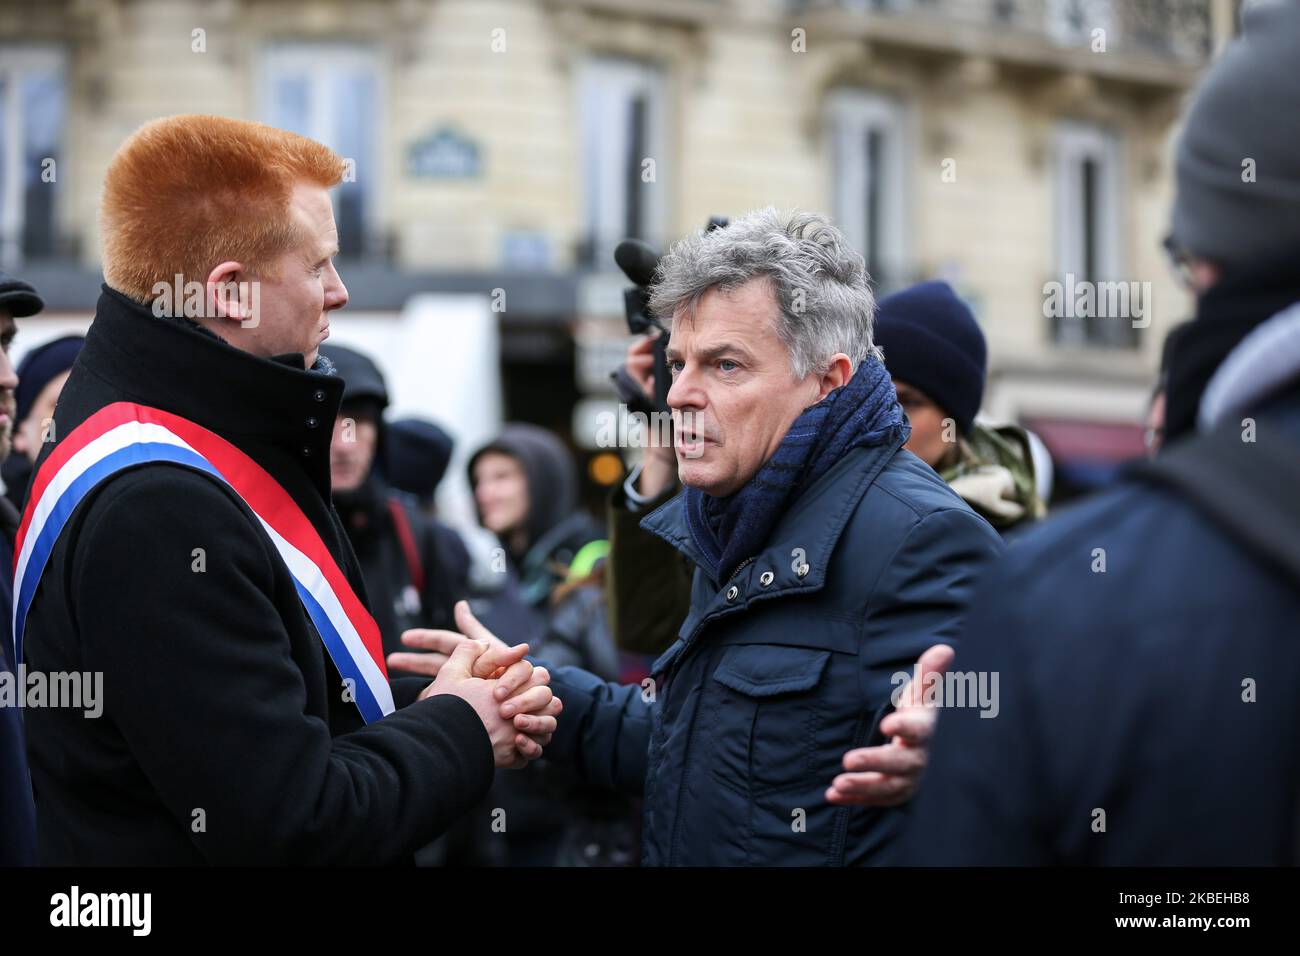 French leftist party La France Insoumise (LFI) MP Adrien Quatennens (L) speaks with Communist party member of Parliament Fabien Roussel (C) as they take part in a demonstration in front the Tour Eiffel in Paris on January 14, 2020, as part of a nationwide multi-sector strike against the French government's pensions overhaul. A transport strike dragged on into its 41st day on January 14, with both the French government and hardline unions digging in on the pension reforms that sparked the standoff. (Photo by Michel Stoupak/NurPhoto) Stock Photo